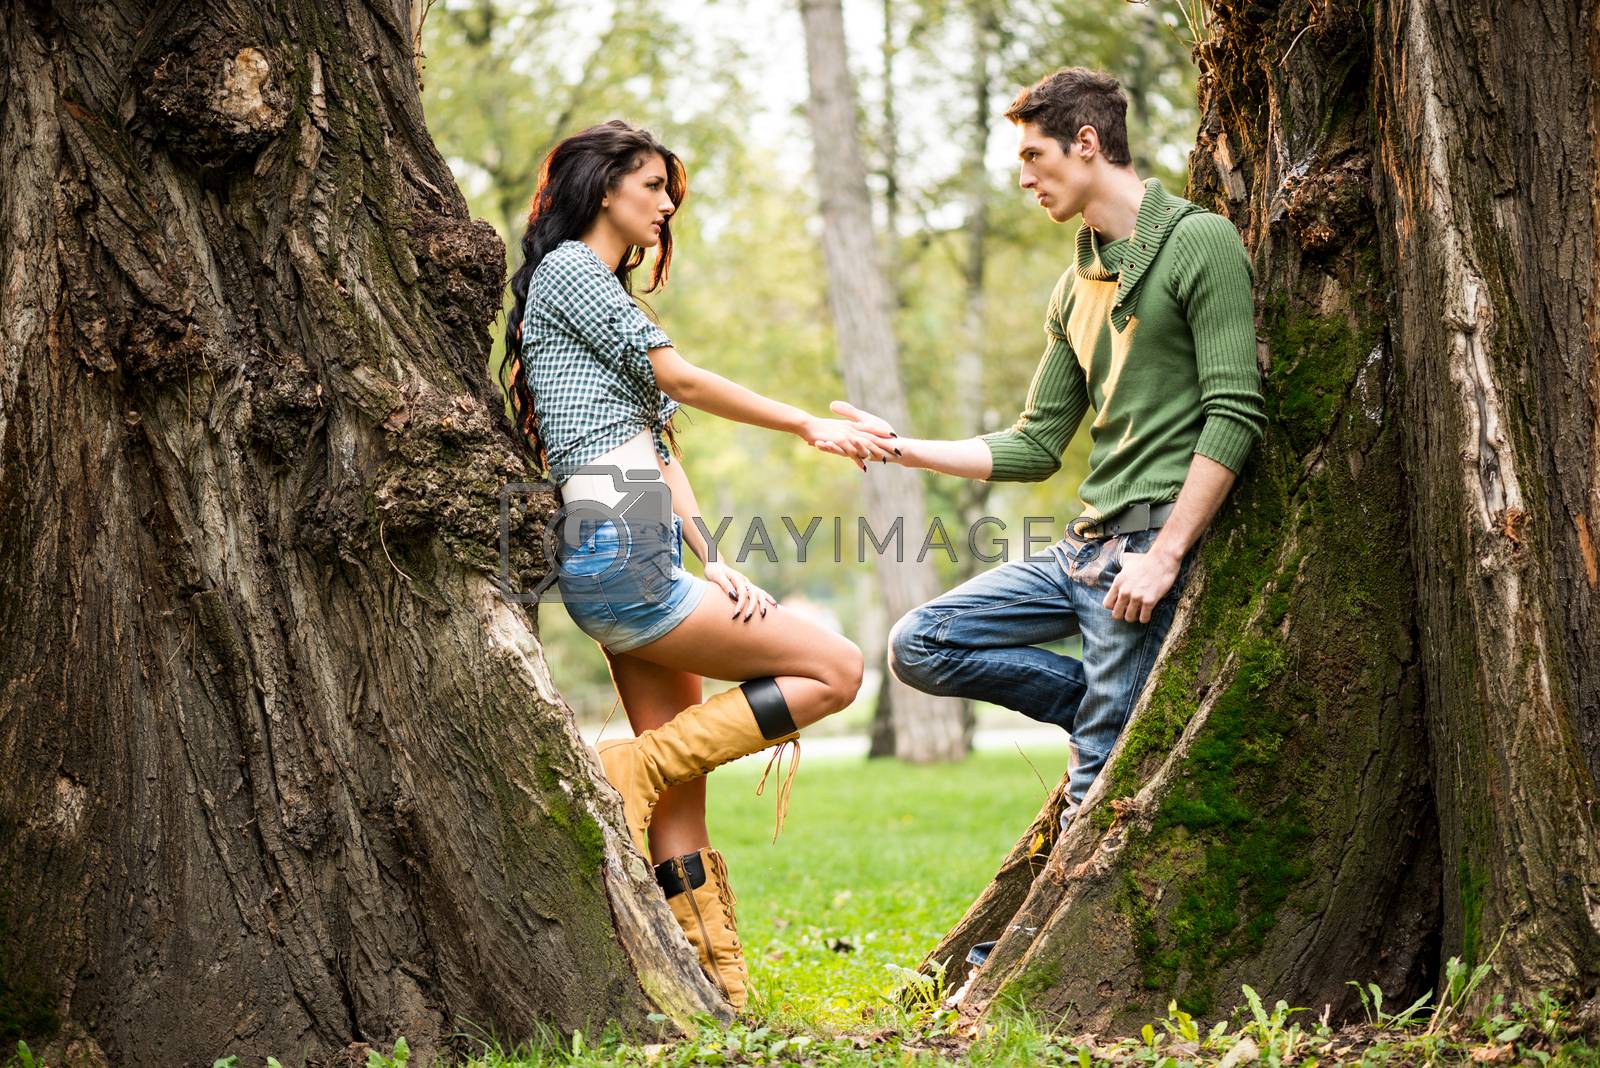 Young and pretty girl and guy at park leaning against a tree trunk, facing each other holding hands.